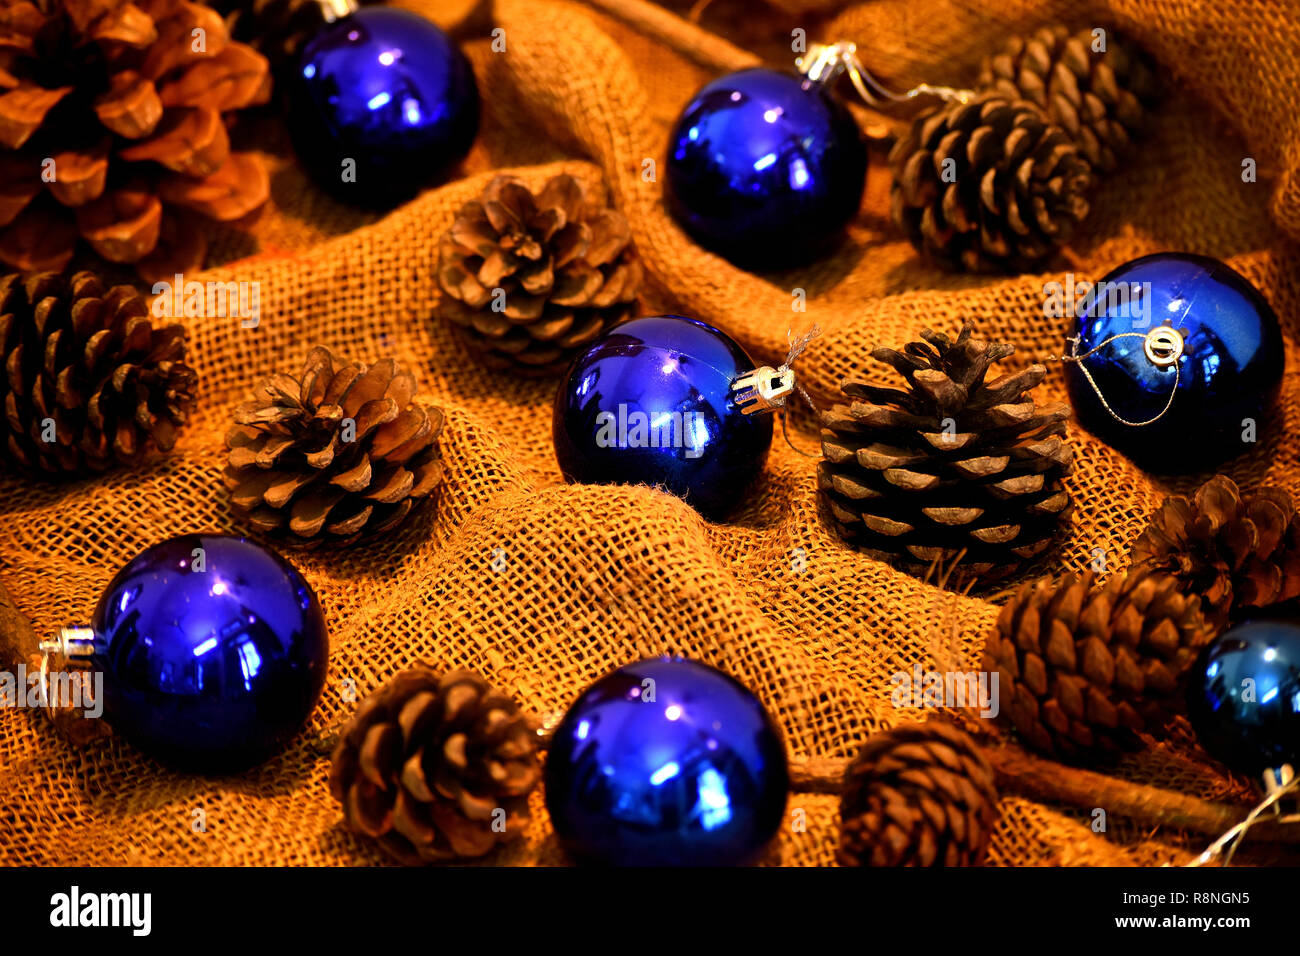 Blue Christmas balls and pine cones. Stock Photo